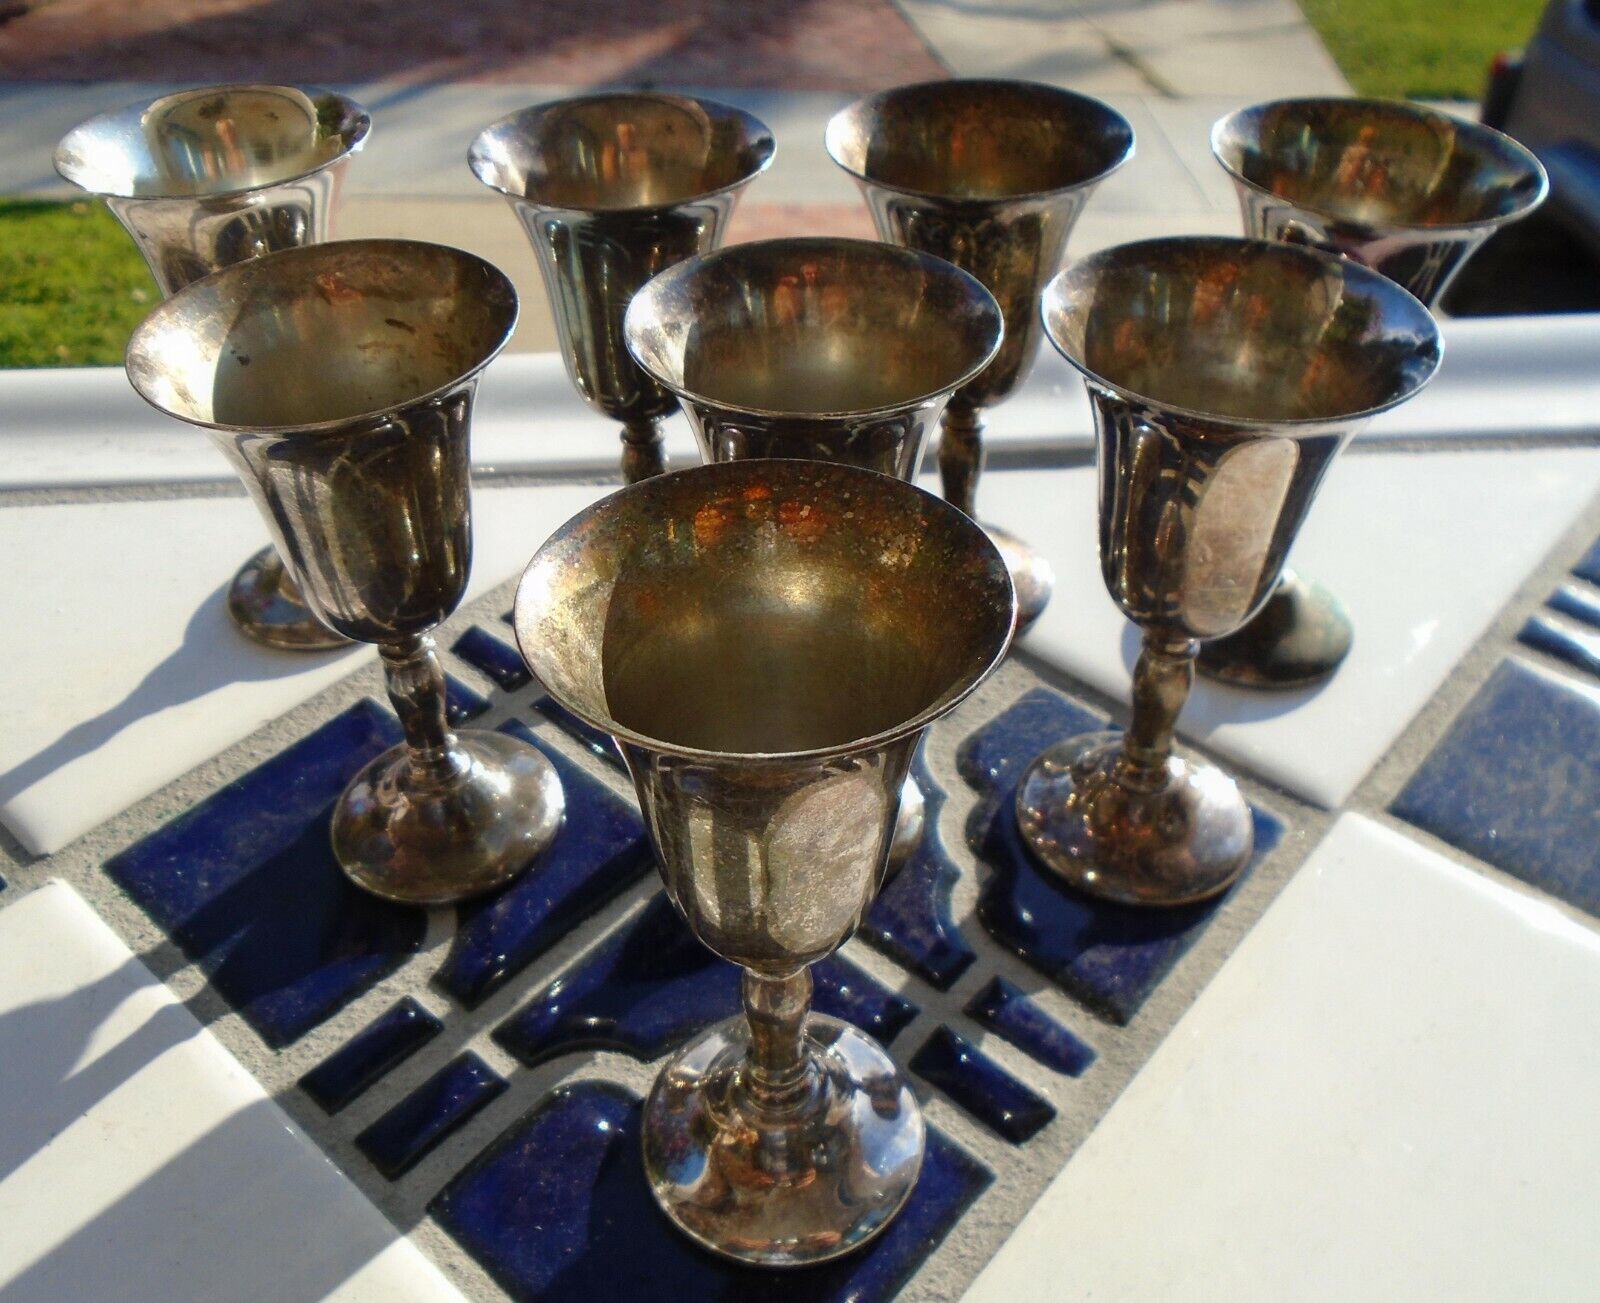 Cordial Wine Glasses set of 8 SILVERPLATE 3 ¾  inches tall set of 8